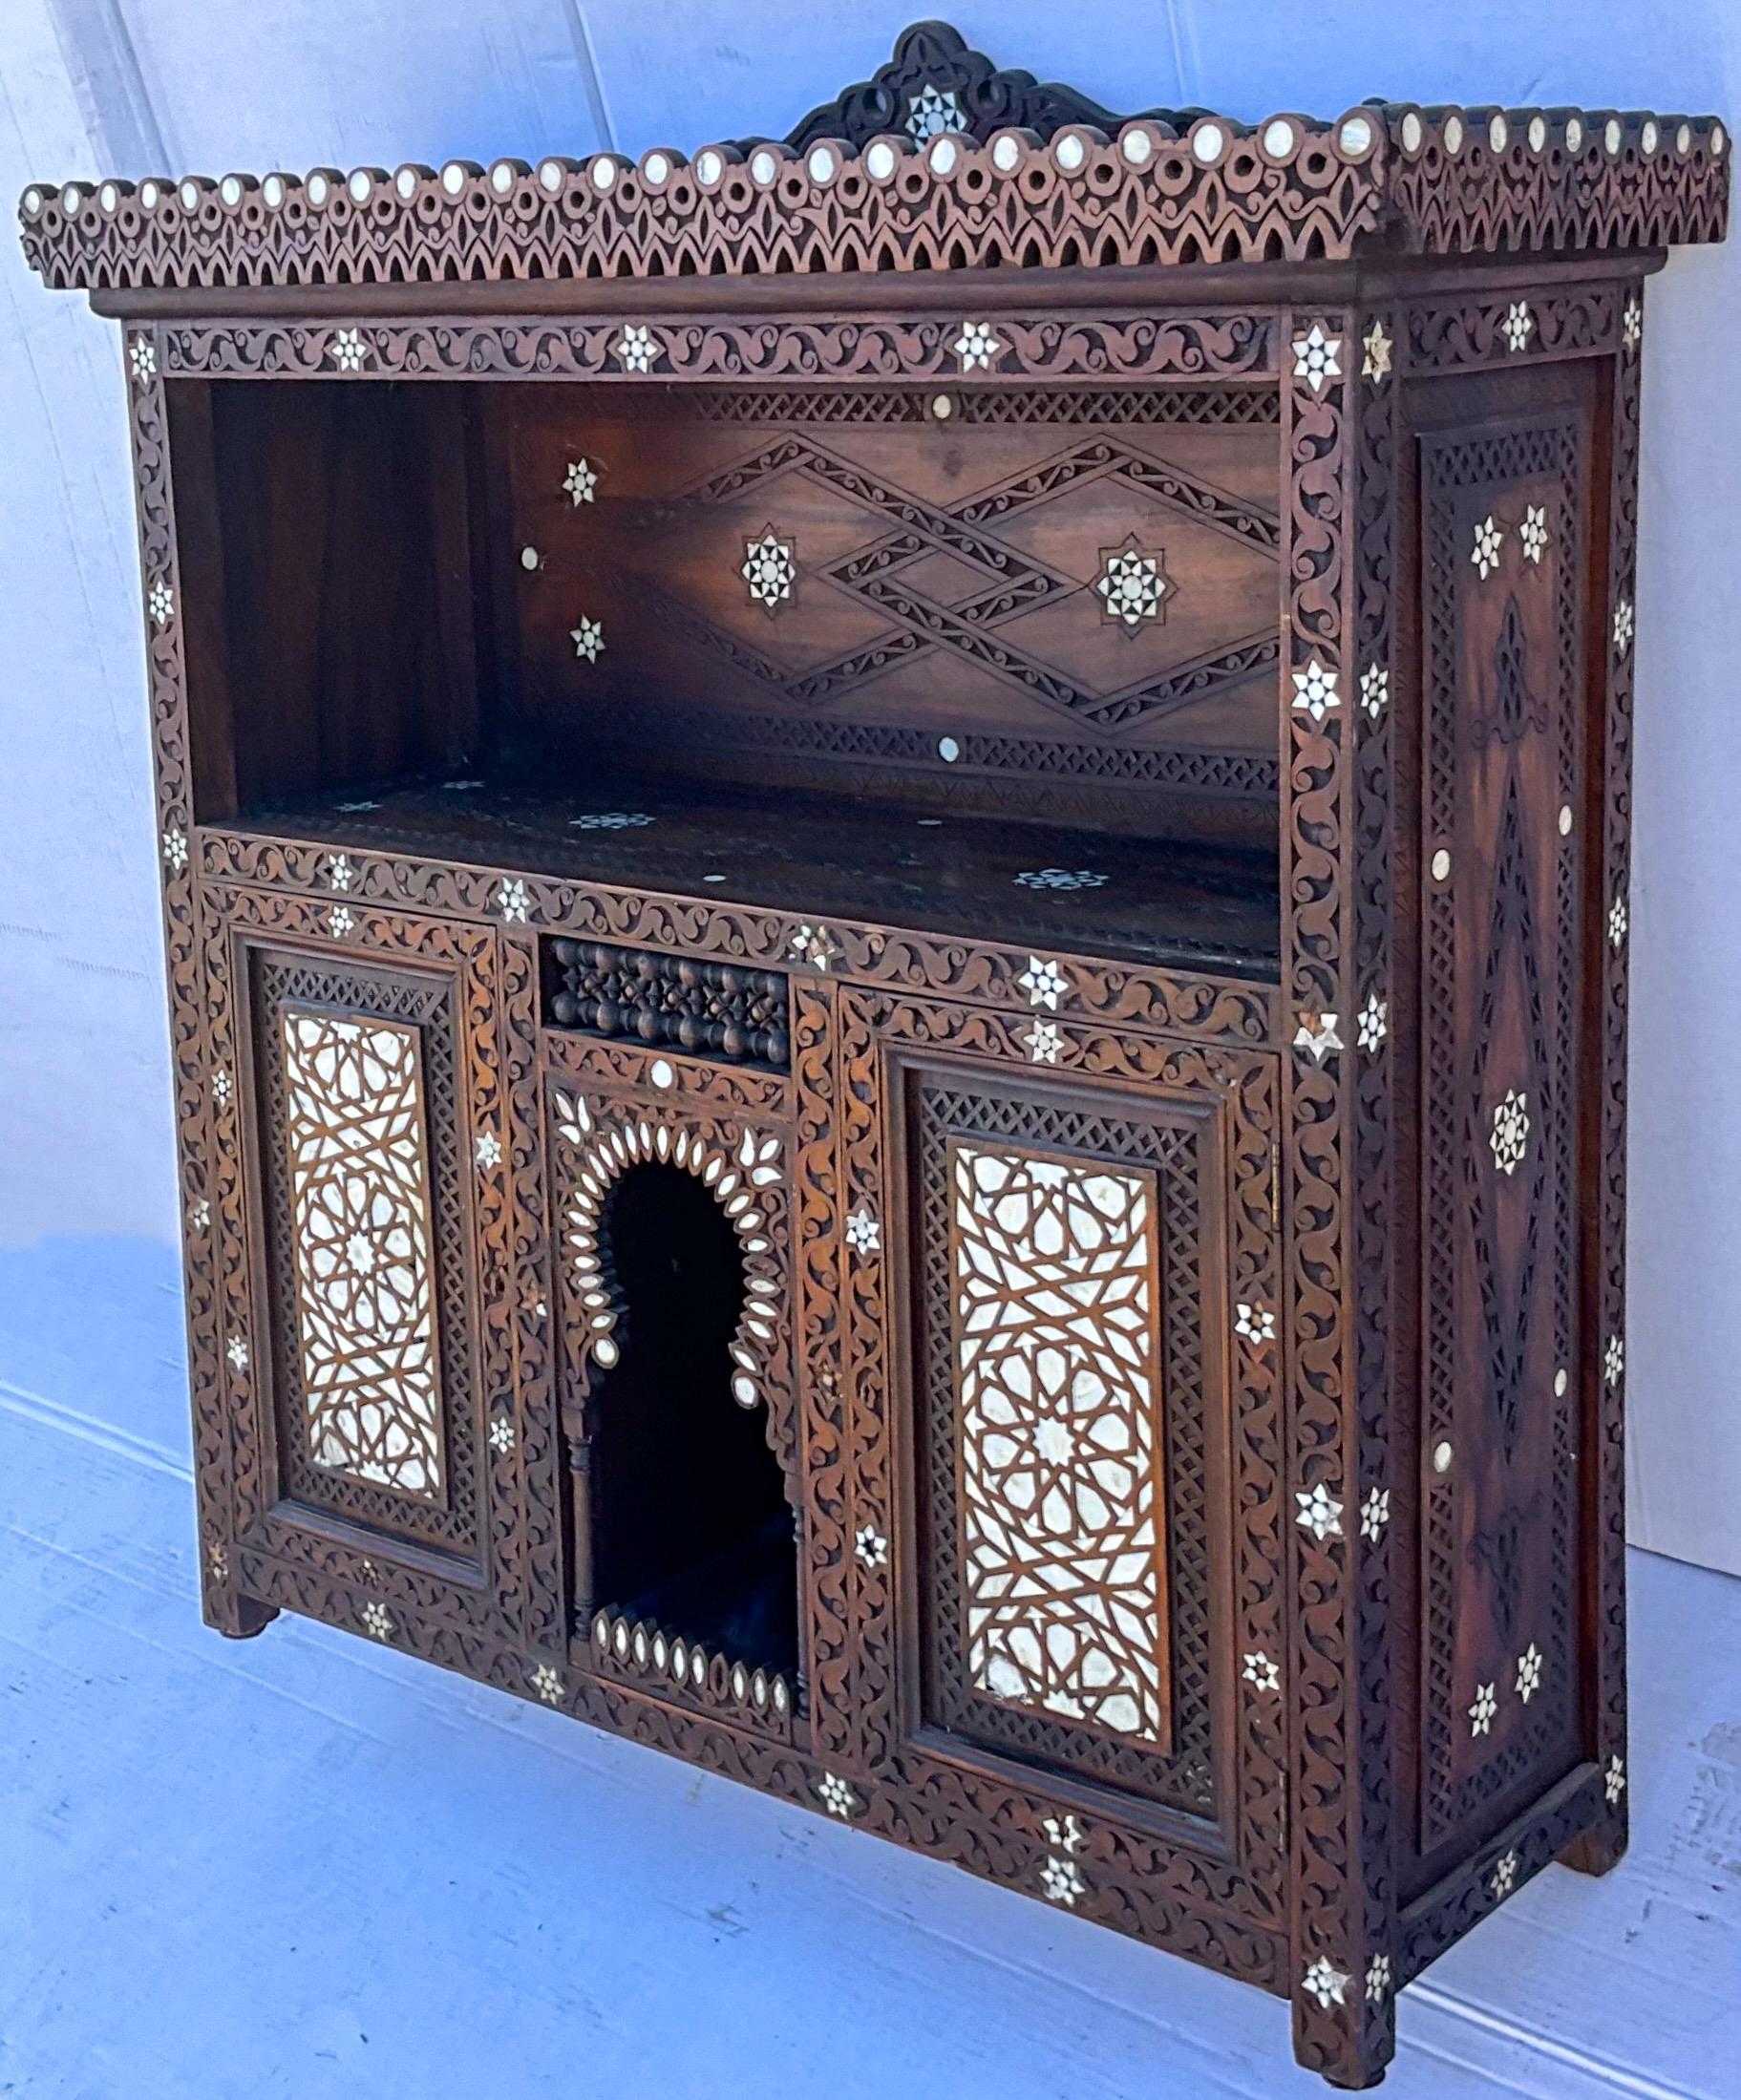 This is an early Anglo-Indian with elaborate mother-of-pearl inlay and carved and pierced details. The wood is most likely teak. I think it could work well from wall to table.